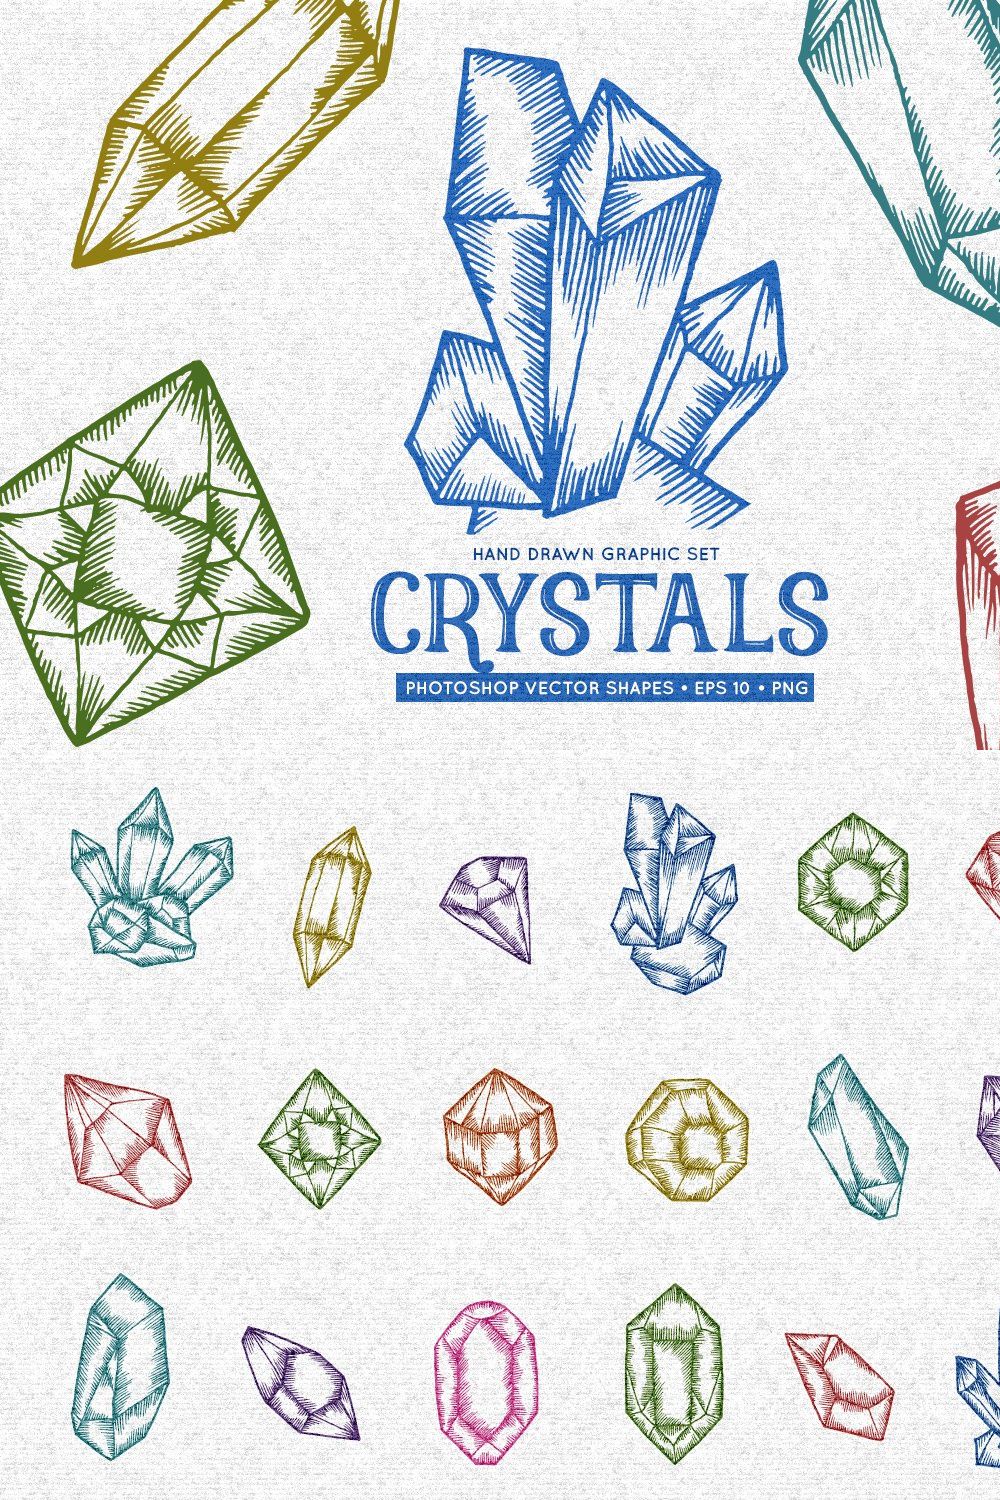 Crystals hand drawn graphic set pinterest preview image.